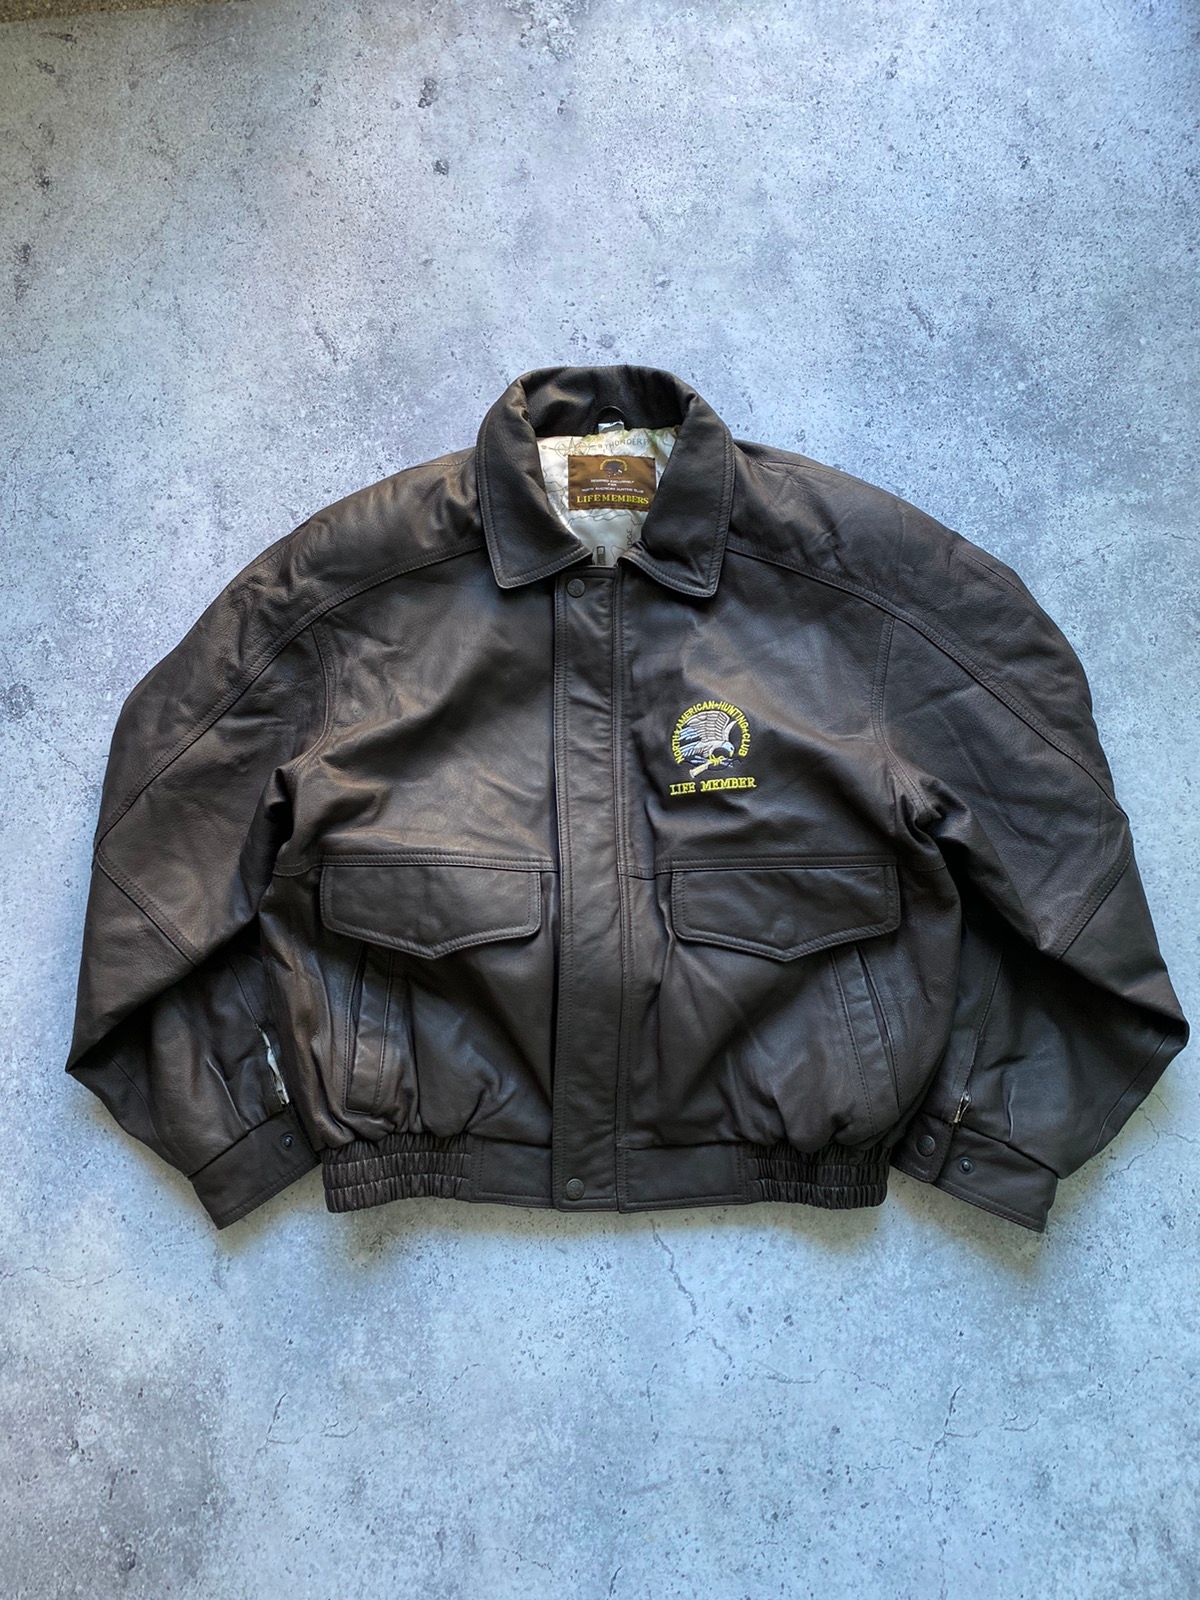 Pre-owned Bomber Jacket X Leather Jacket Vintage Real Leather Hunter Bomber Jacket In Brown